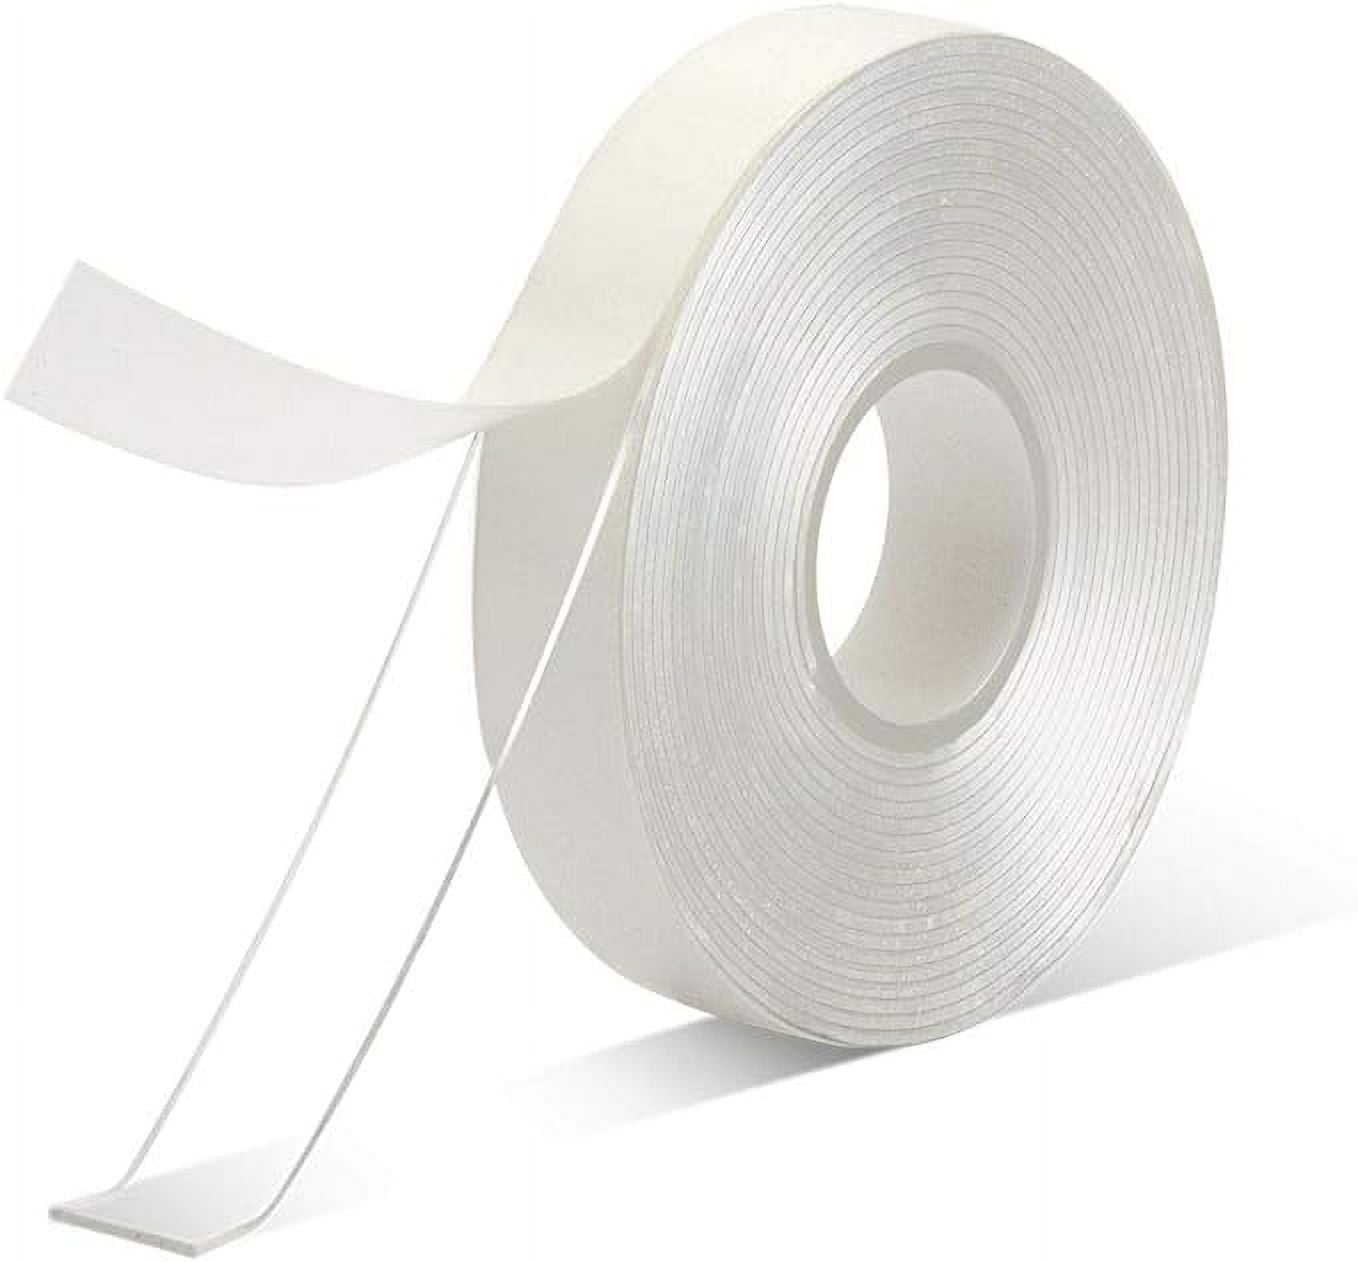 5PK Clear Double Sided Tape for Crafts 1/2 inch Wide Heavy Duty